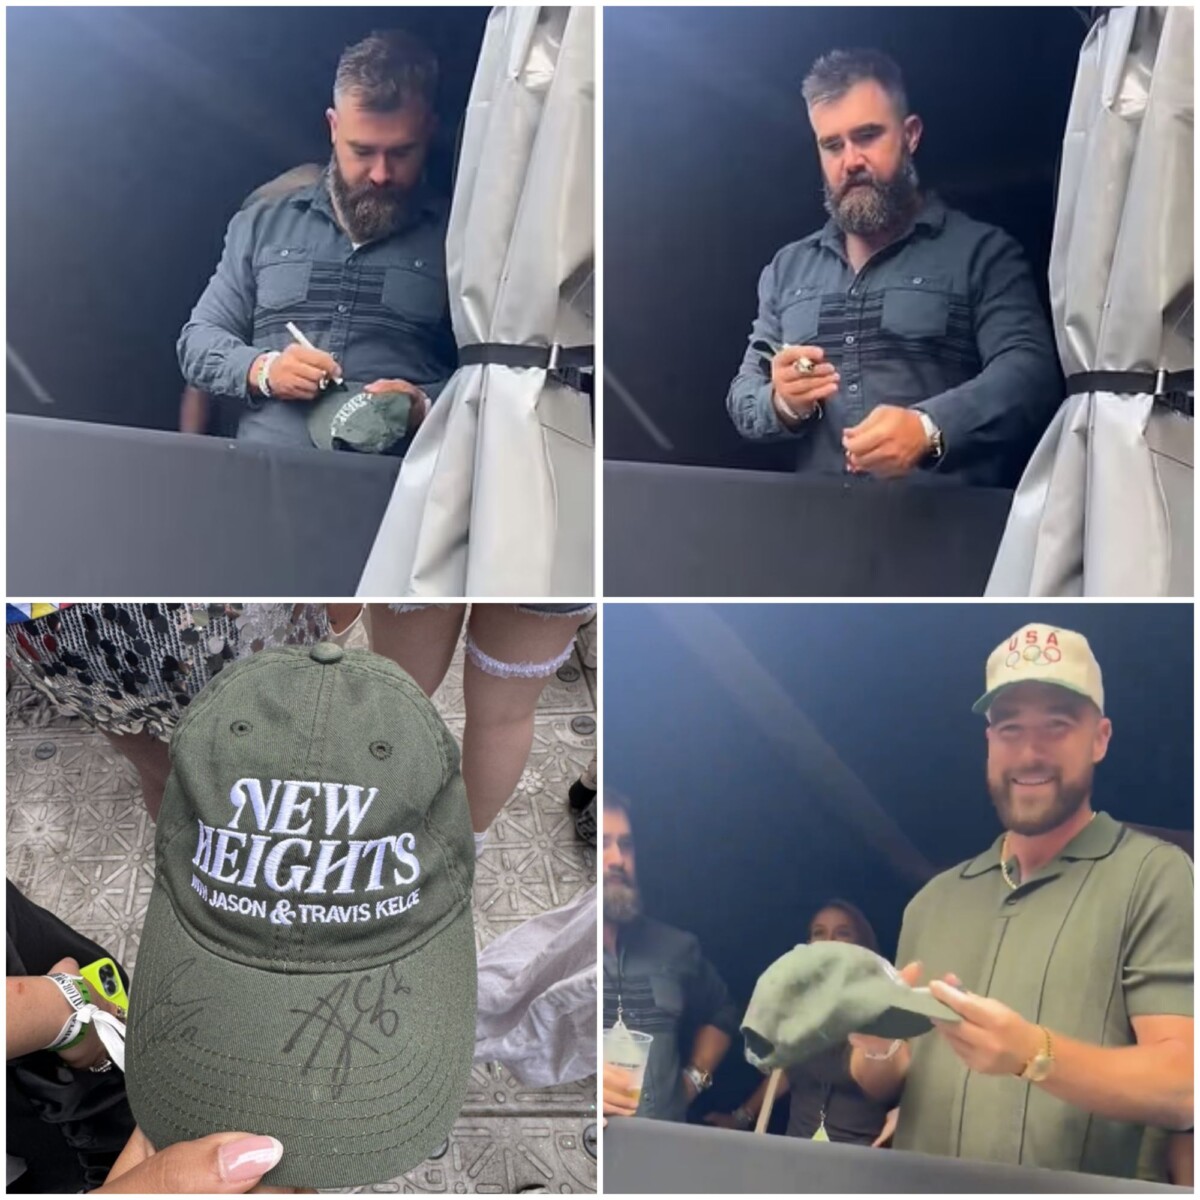 Video: Sweet moment Jason and Travis Kelce sign a fan’s ‘New Heights’ hat at the Eras Tour in London.